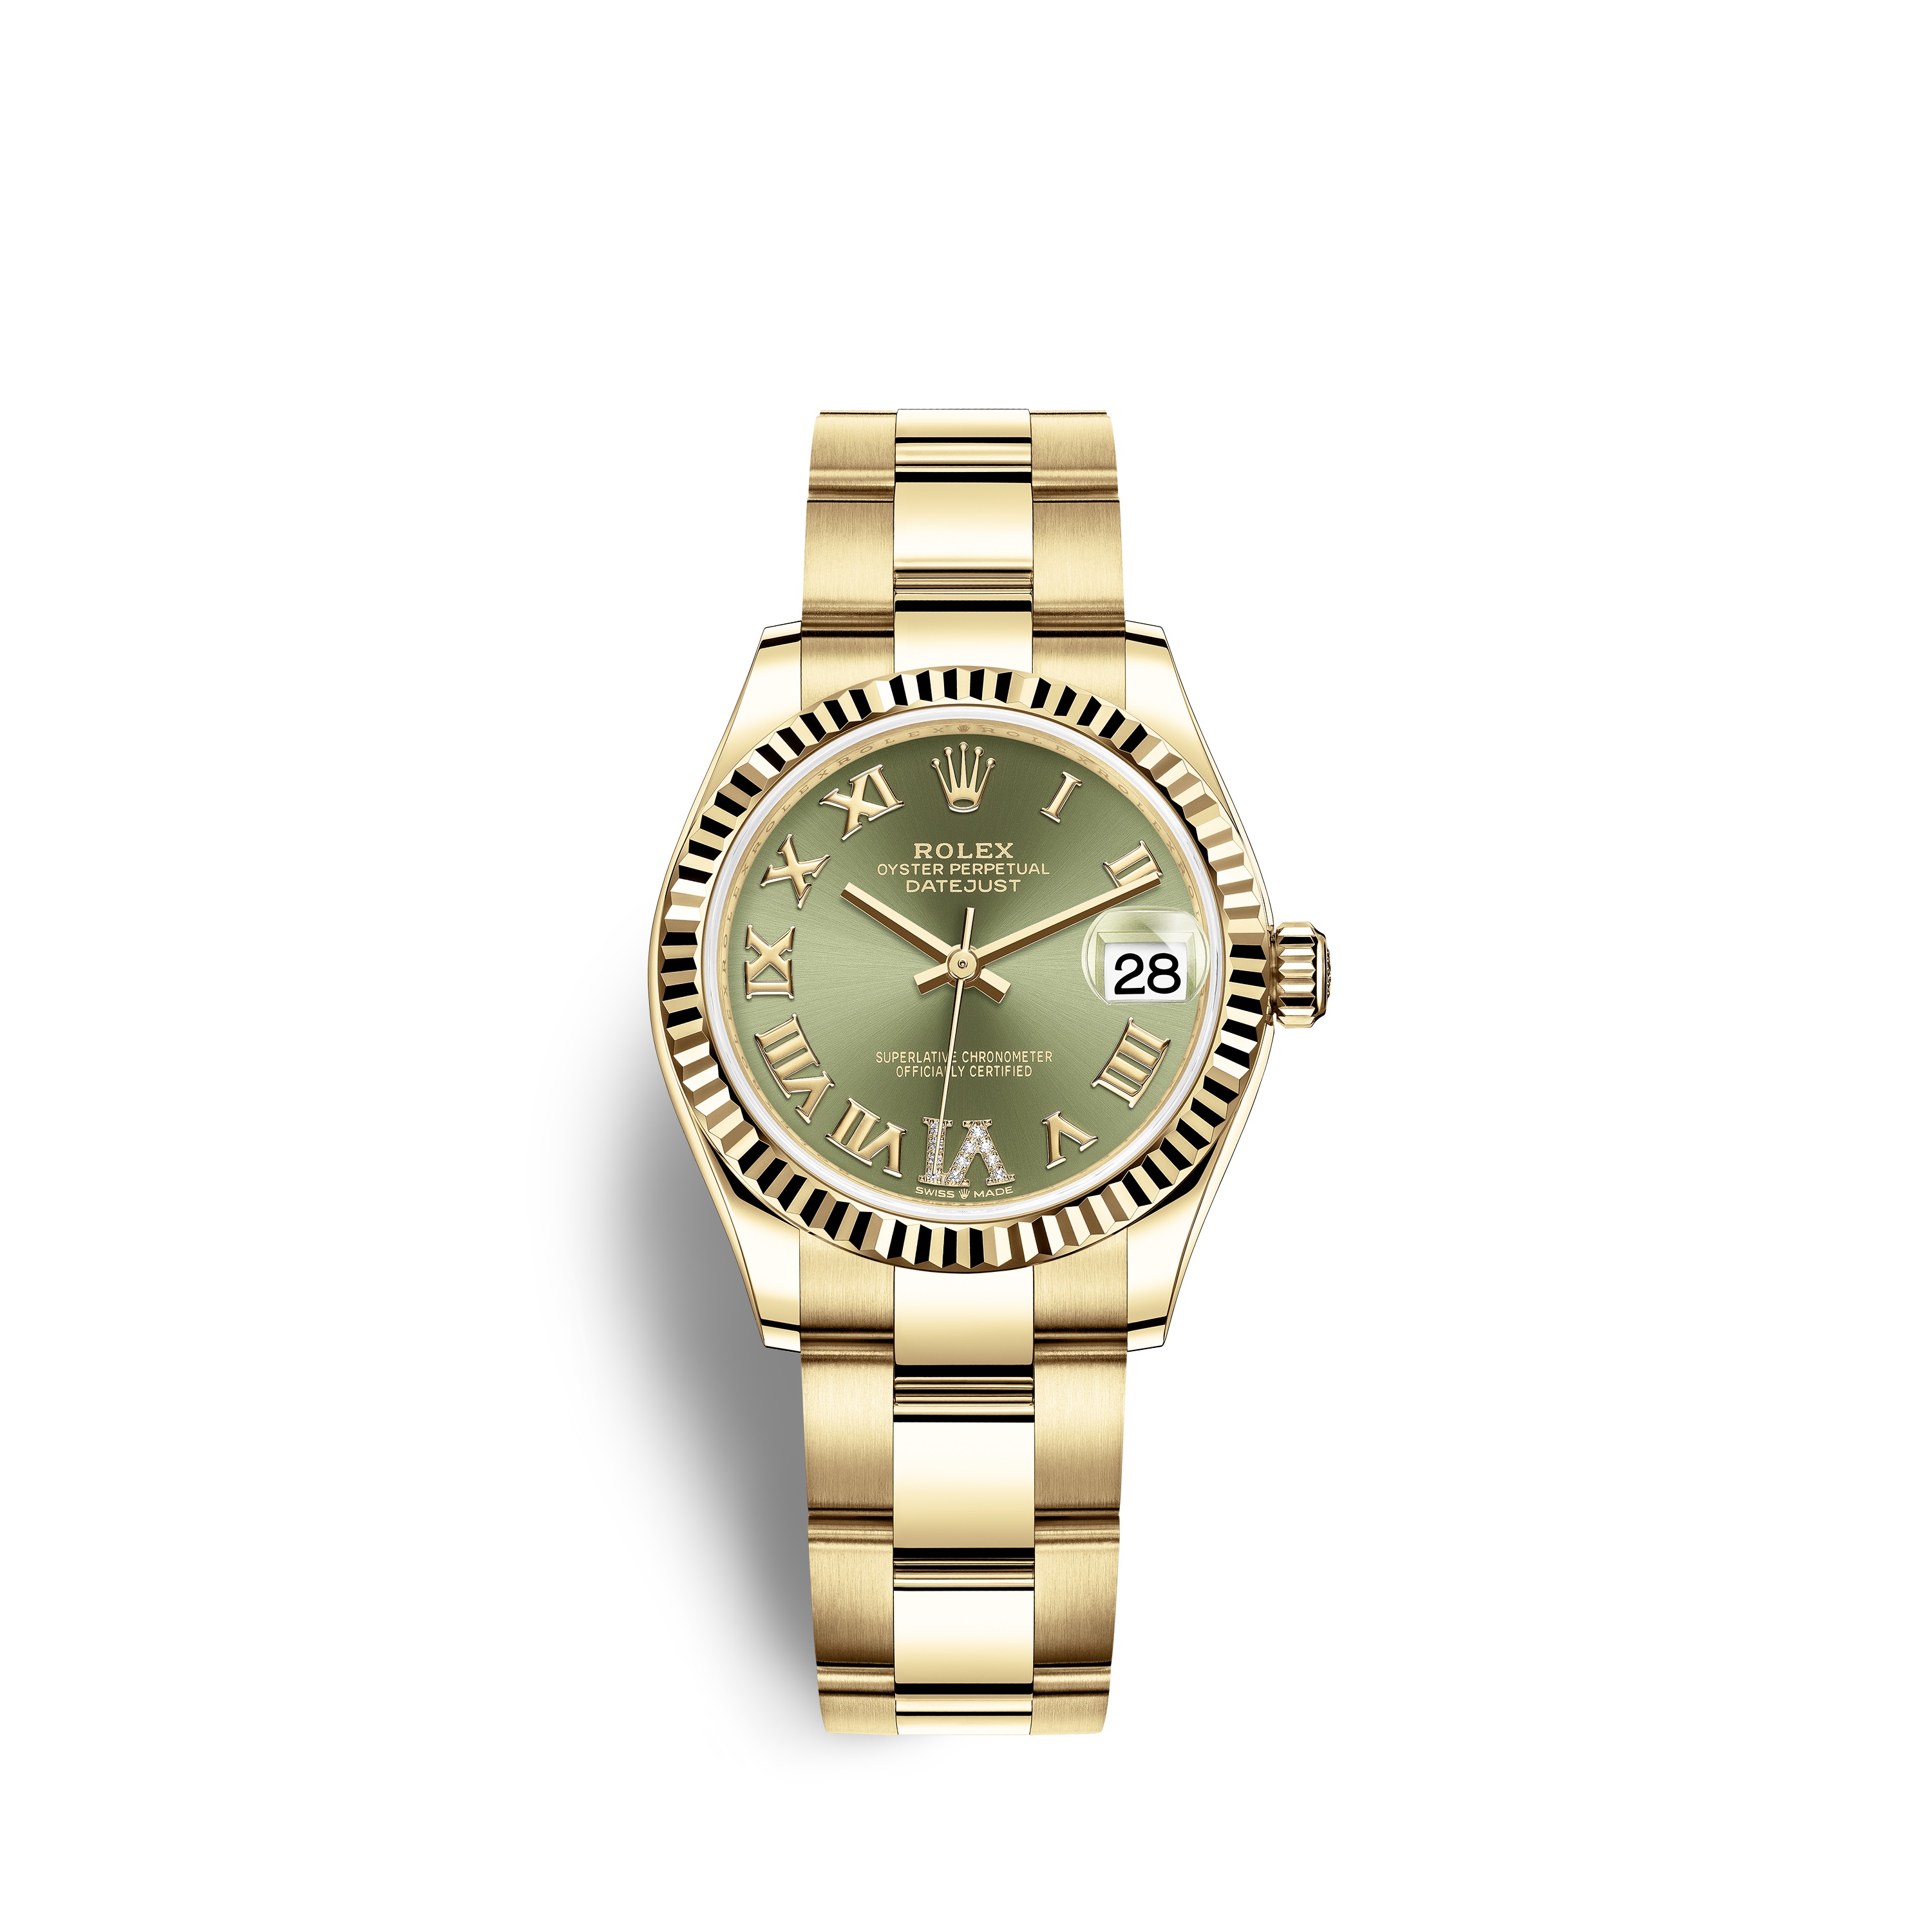 Datejust 31 278278 Gold Watch (Olive Green Set with Diamonds)